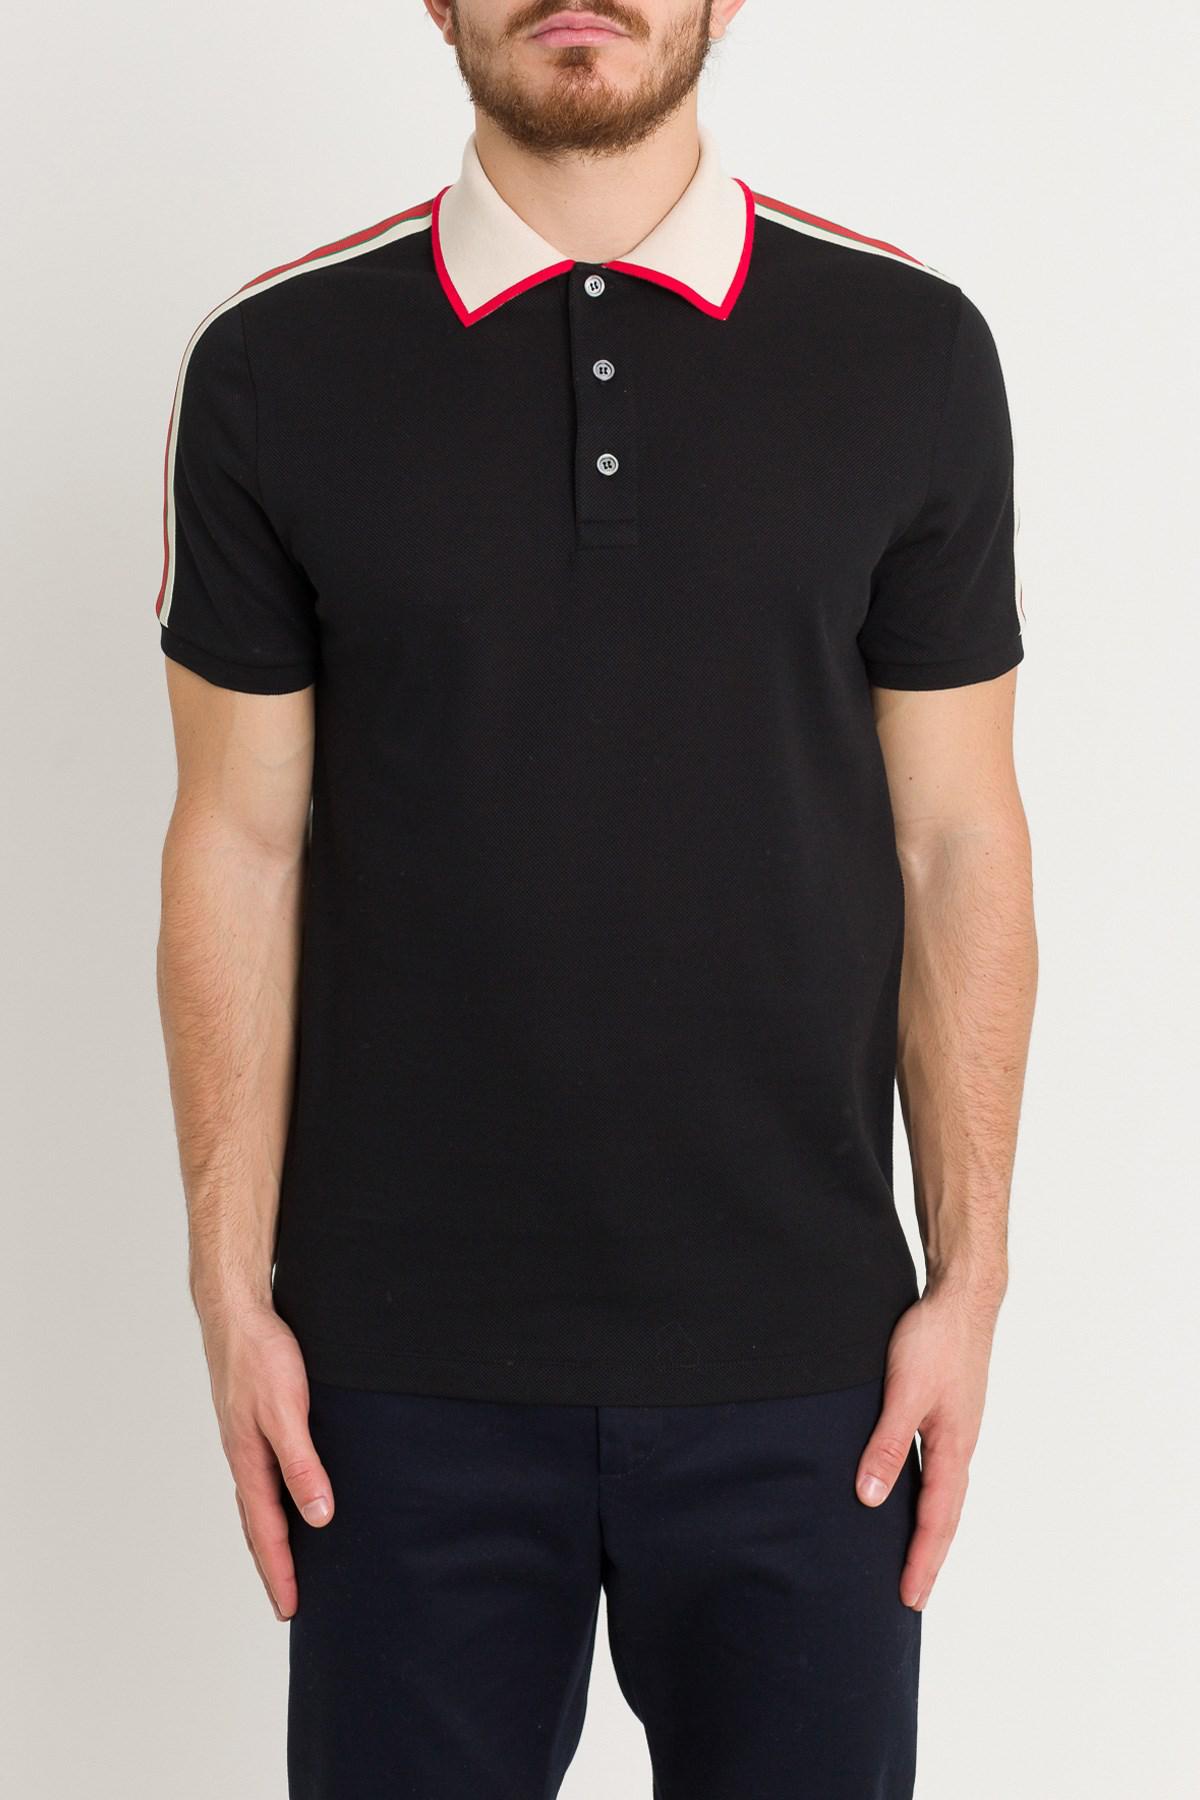 Gucci Cotton Polo With Stripe in Black for Men - Lyst